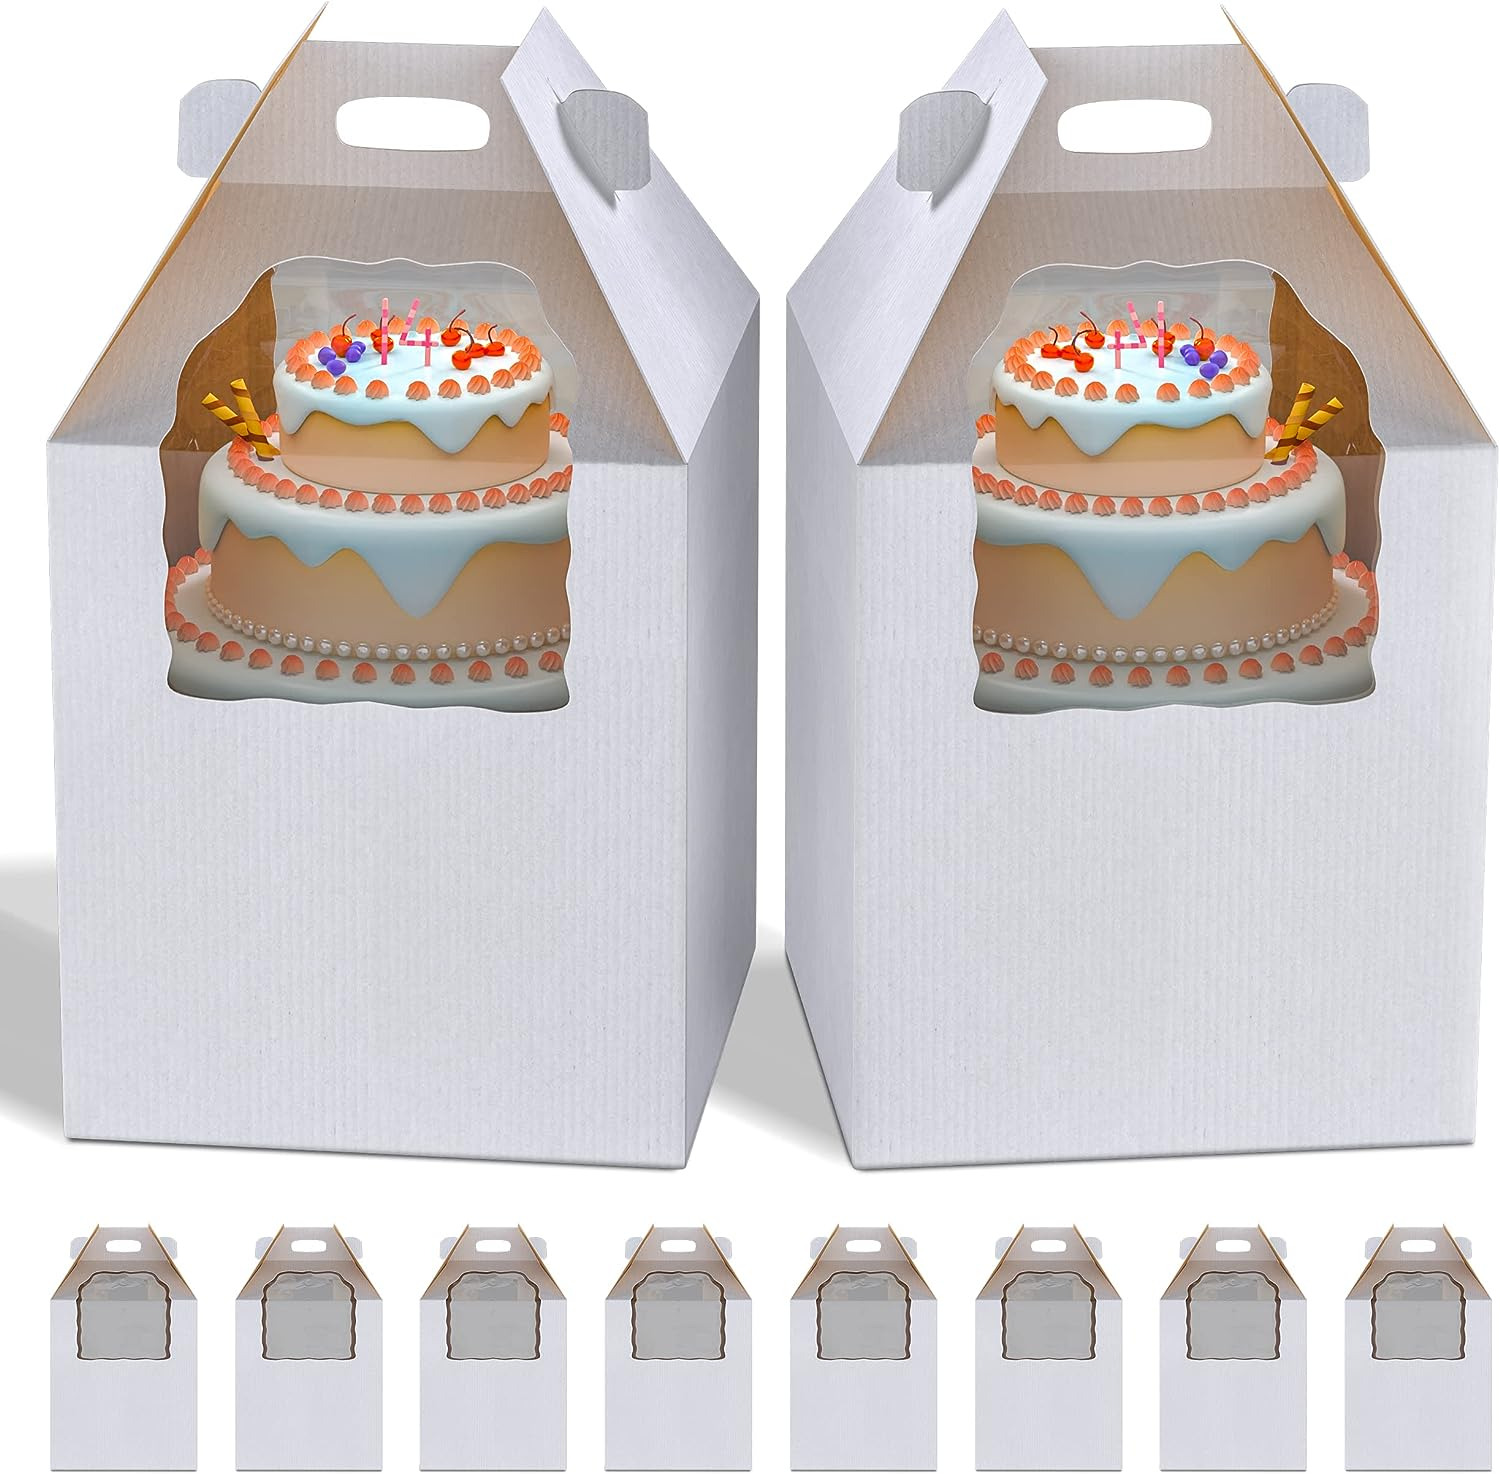 Disposable Cake Carrier with Window 10pk - 12 x 12 x 14in Tall Cake Boxes with W